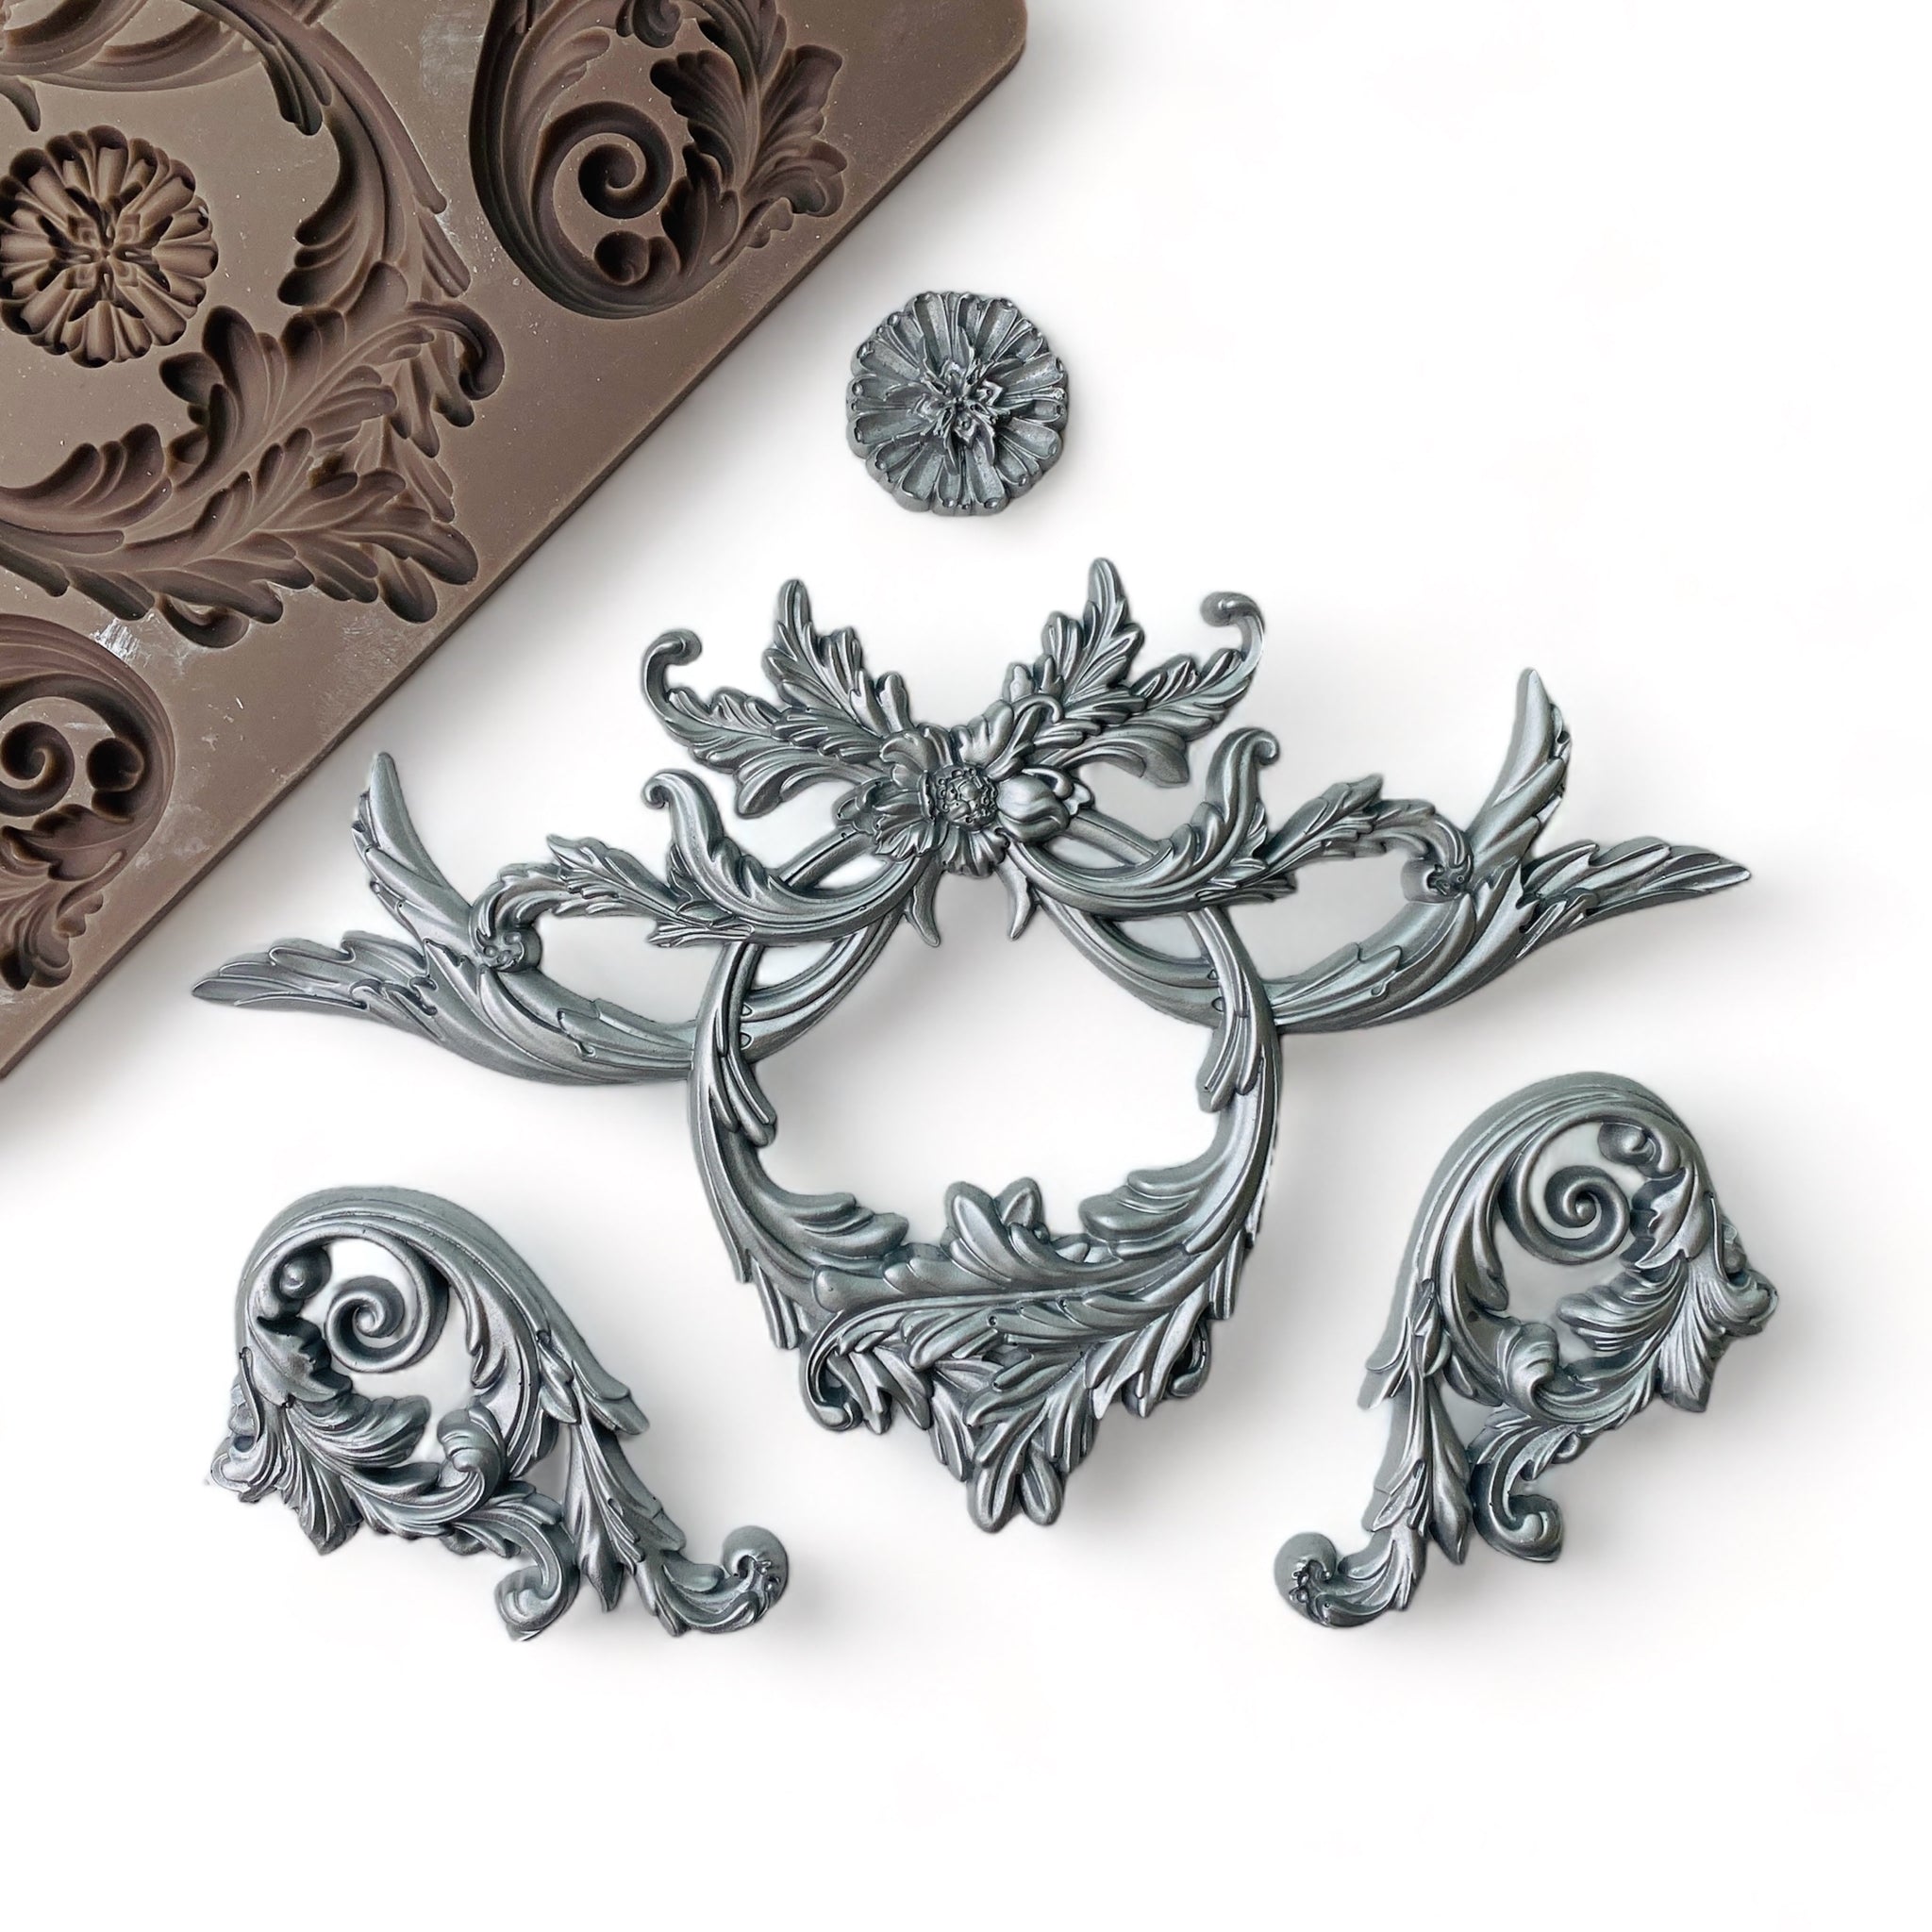 A brown silicone mold and silver colored castings of ornate scrolling accent pieces and a medallion are against a white background.